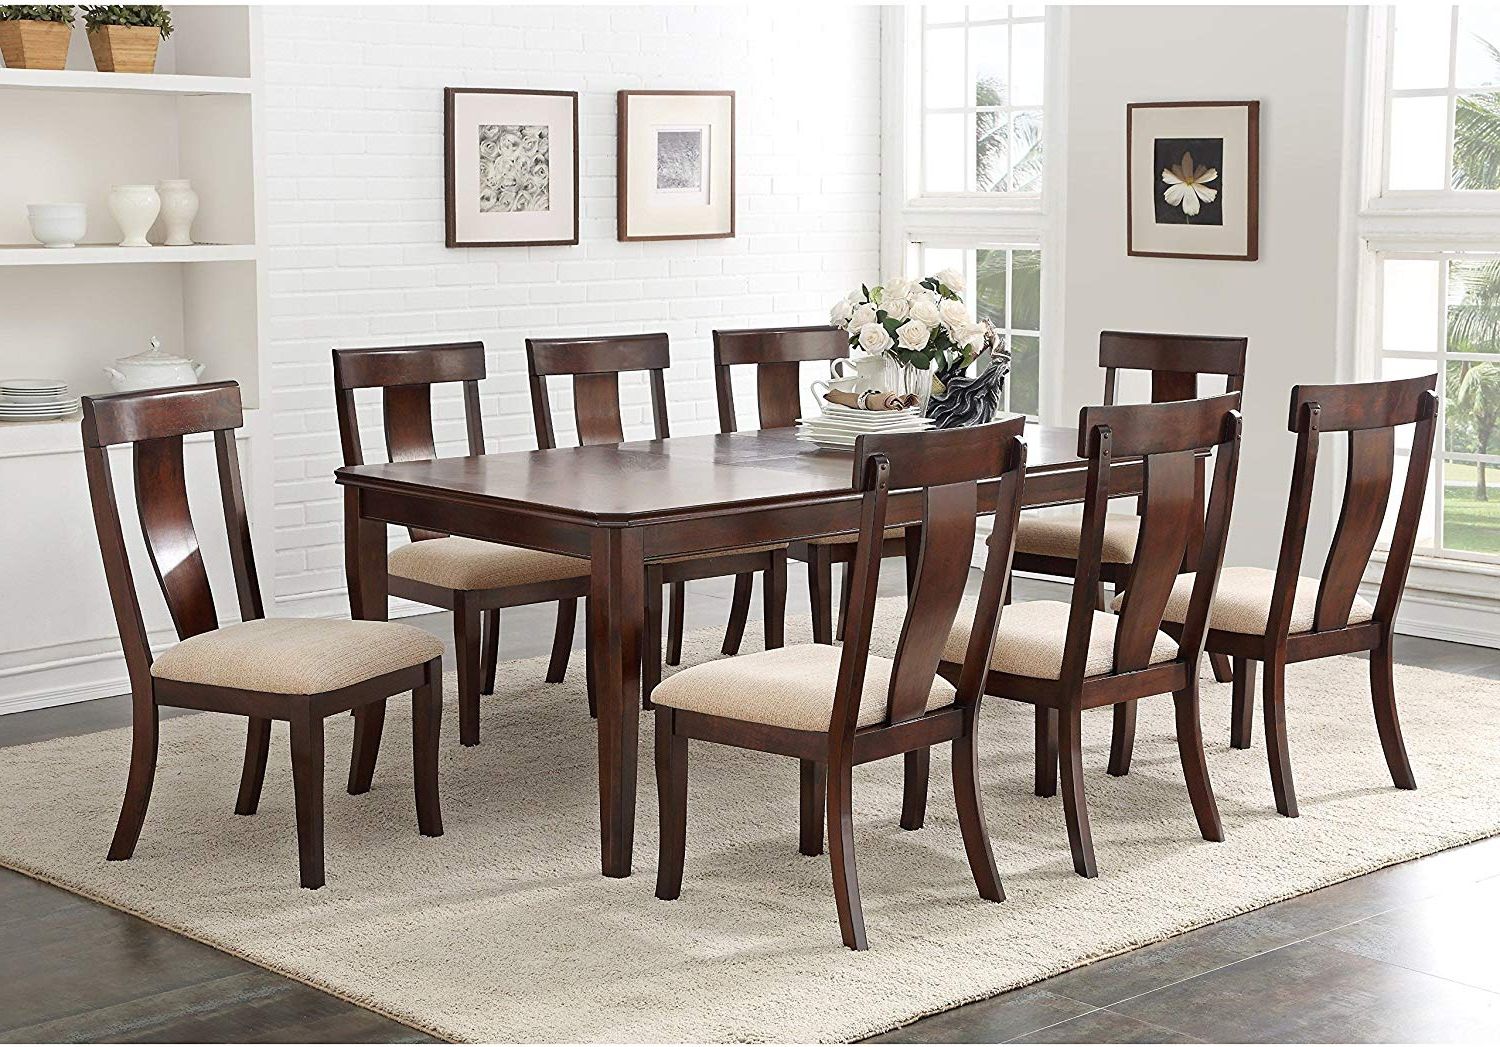 View Gallery of Contemporary Rectangular Dining Tables (Showing 8 of 30